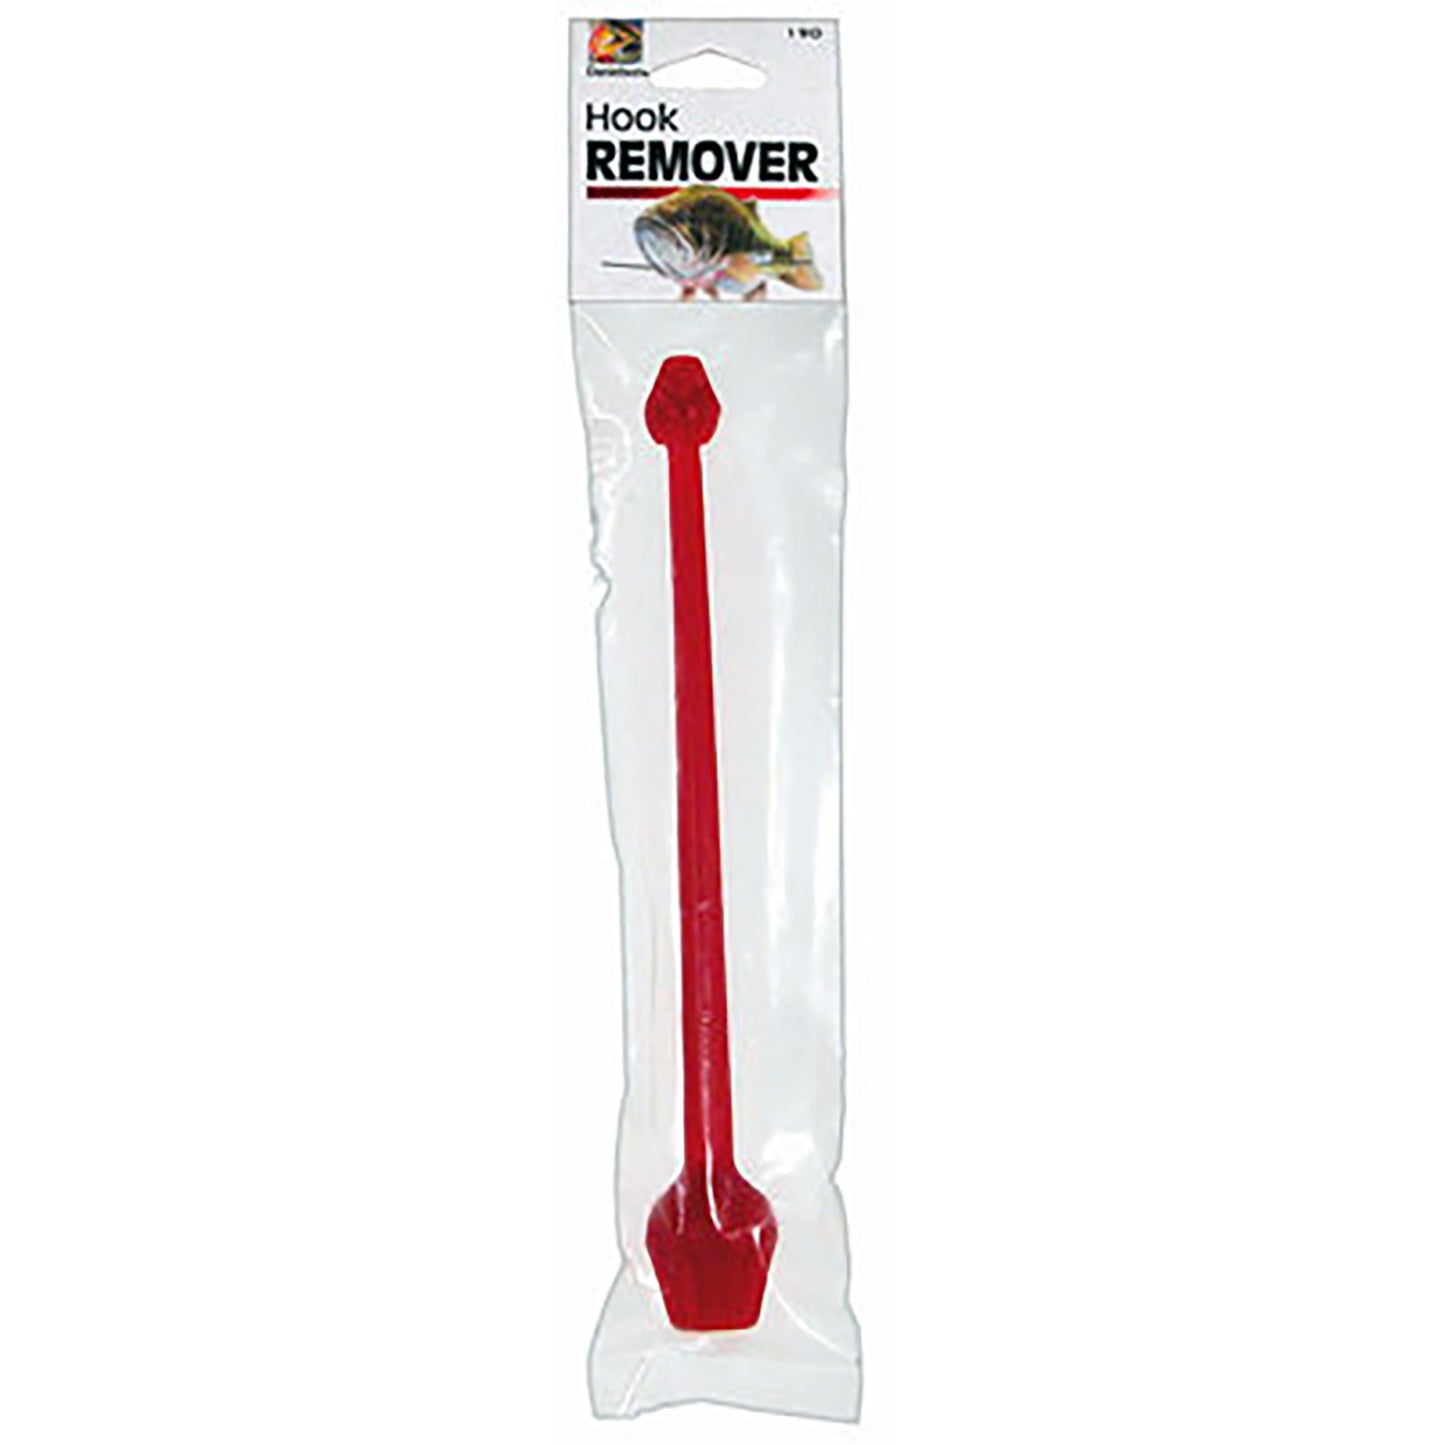 HOOK REMOVER